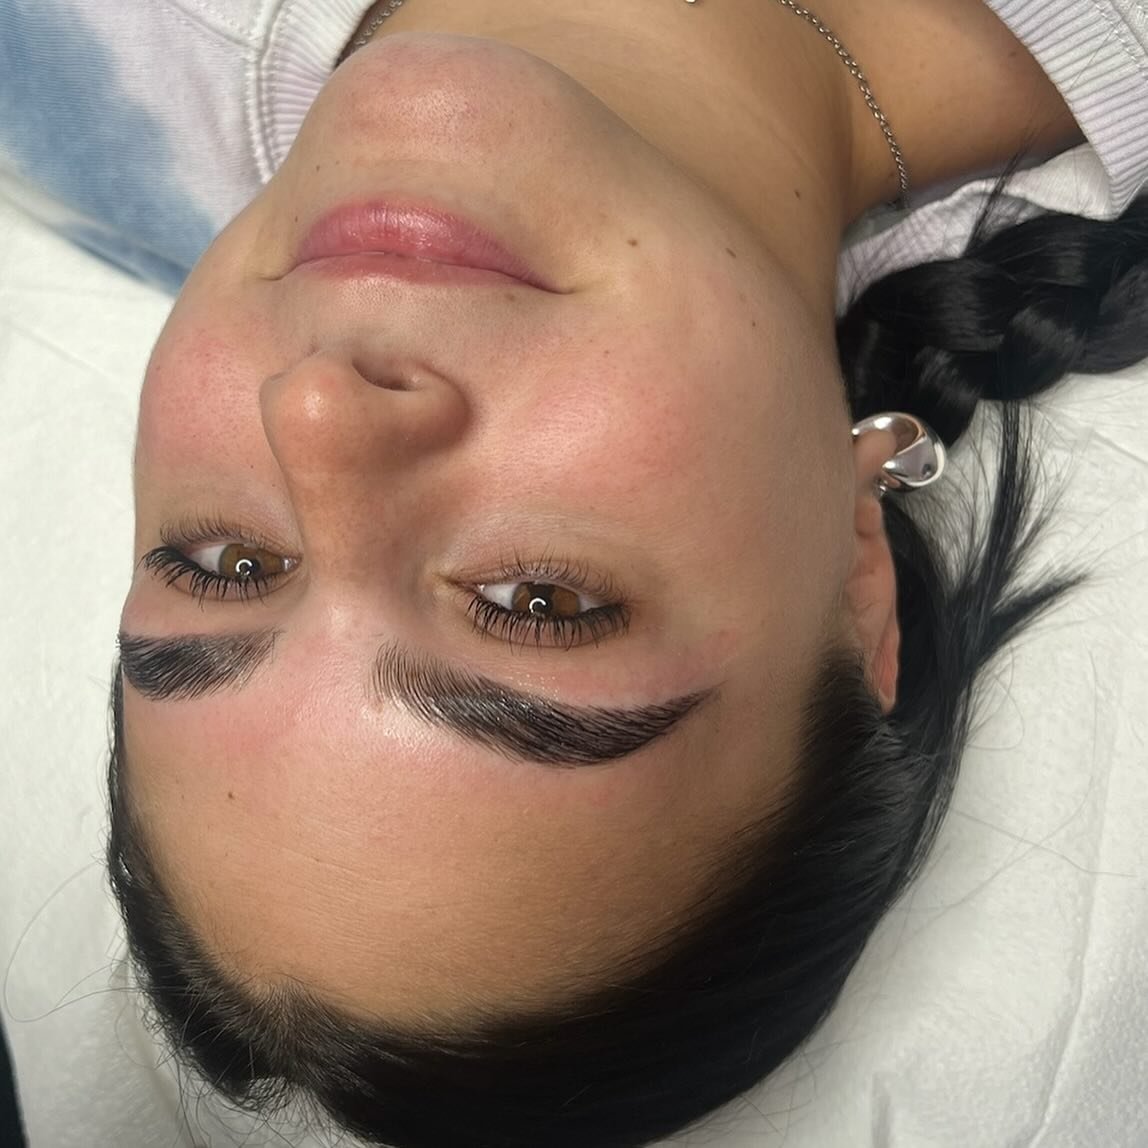 Brow lamination and tint after 👉🏼 before 

Done by Gina @supernatural.skn at our Jersey location